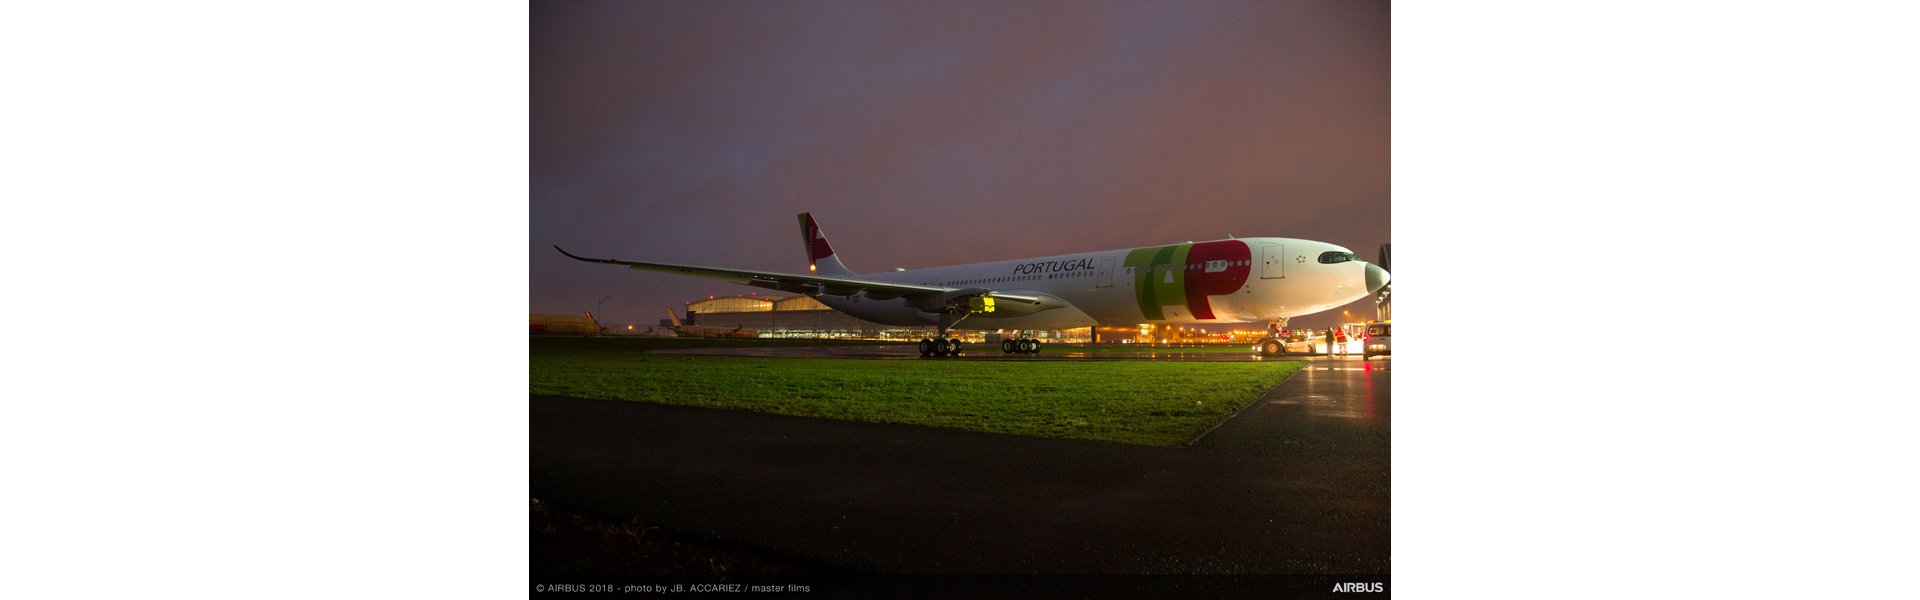 A Double Roll Out For The First A330neo Operator Tap Air